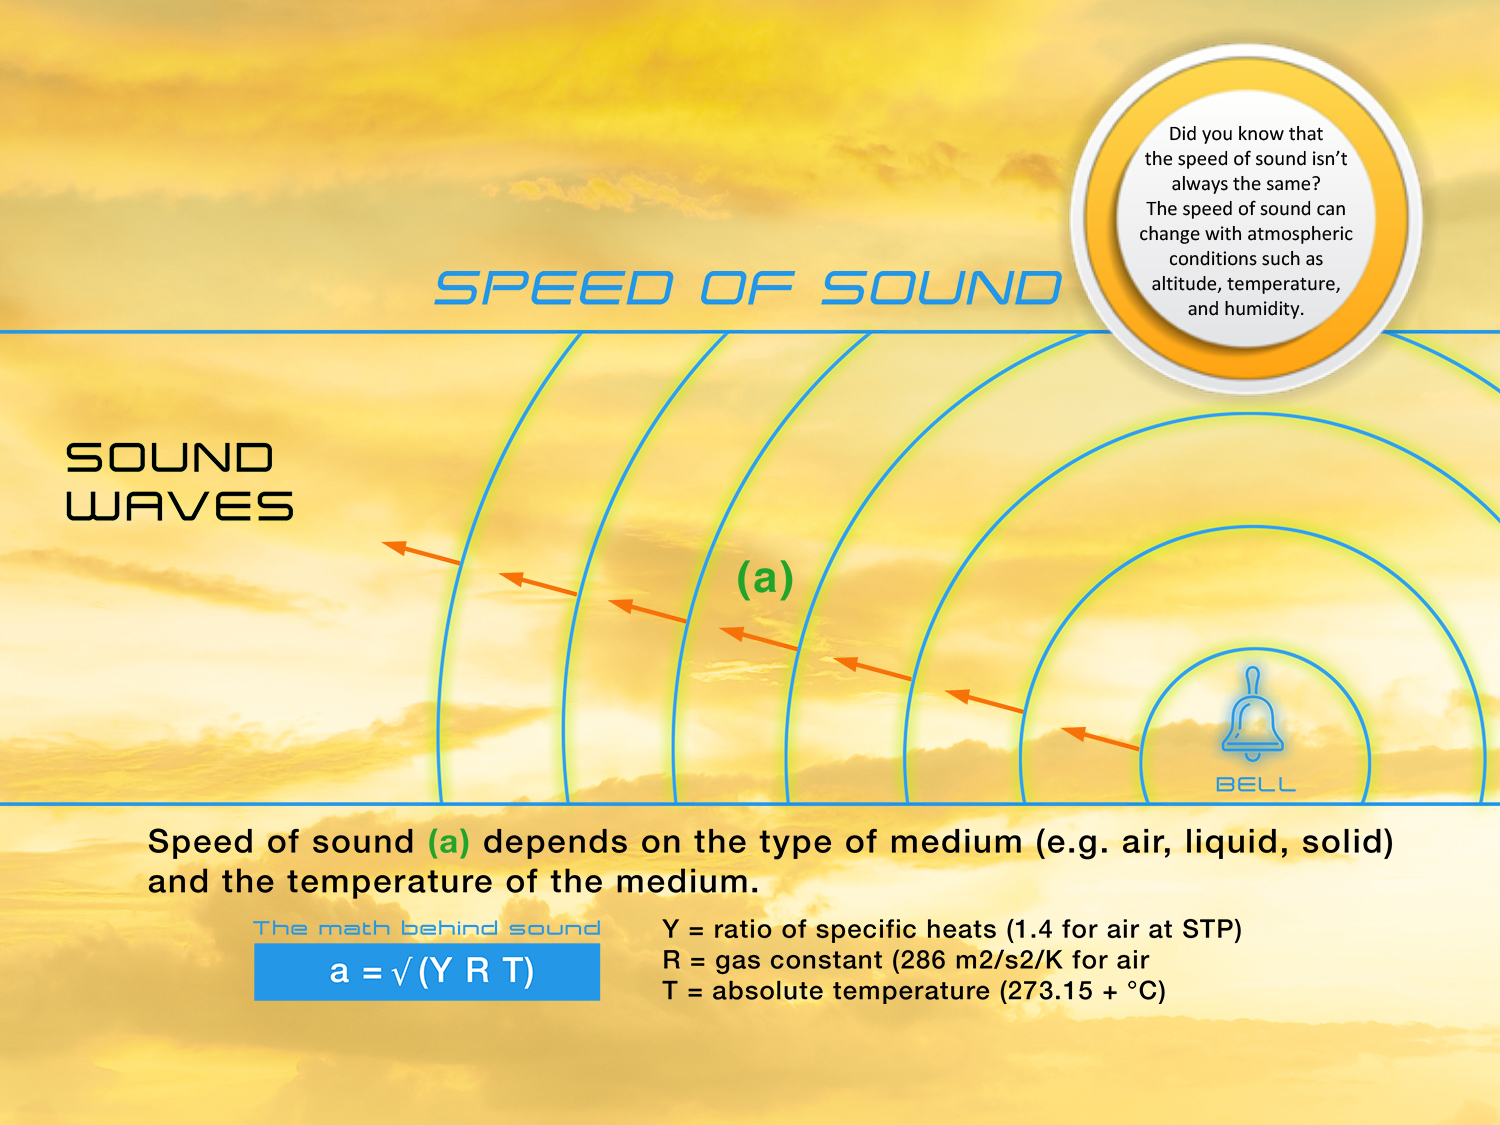 Diagram showing the speed of sound. Speed of sound (a) depends on the type of medium (e.g. air, liquid, solid) and the temperature of the medium. a=sqrt (Y R T). Y = ratio of specific heats (1.4 for air at STP); R = gas constant (286 m2/s2/K for air; T = absolute temperature (273.15 + °C)